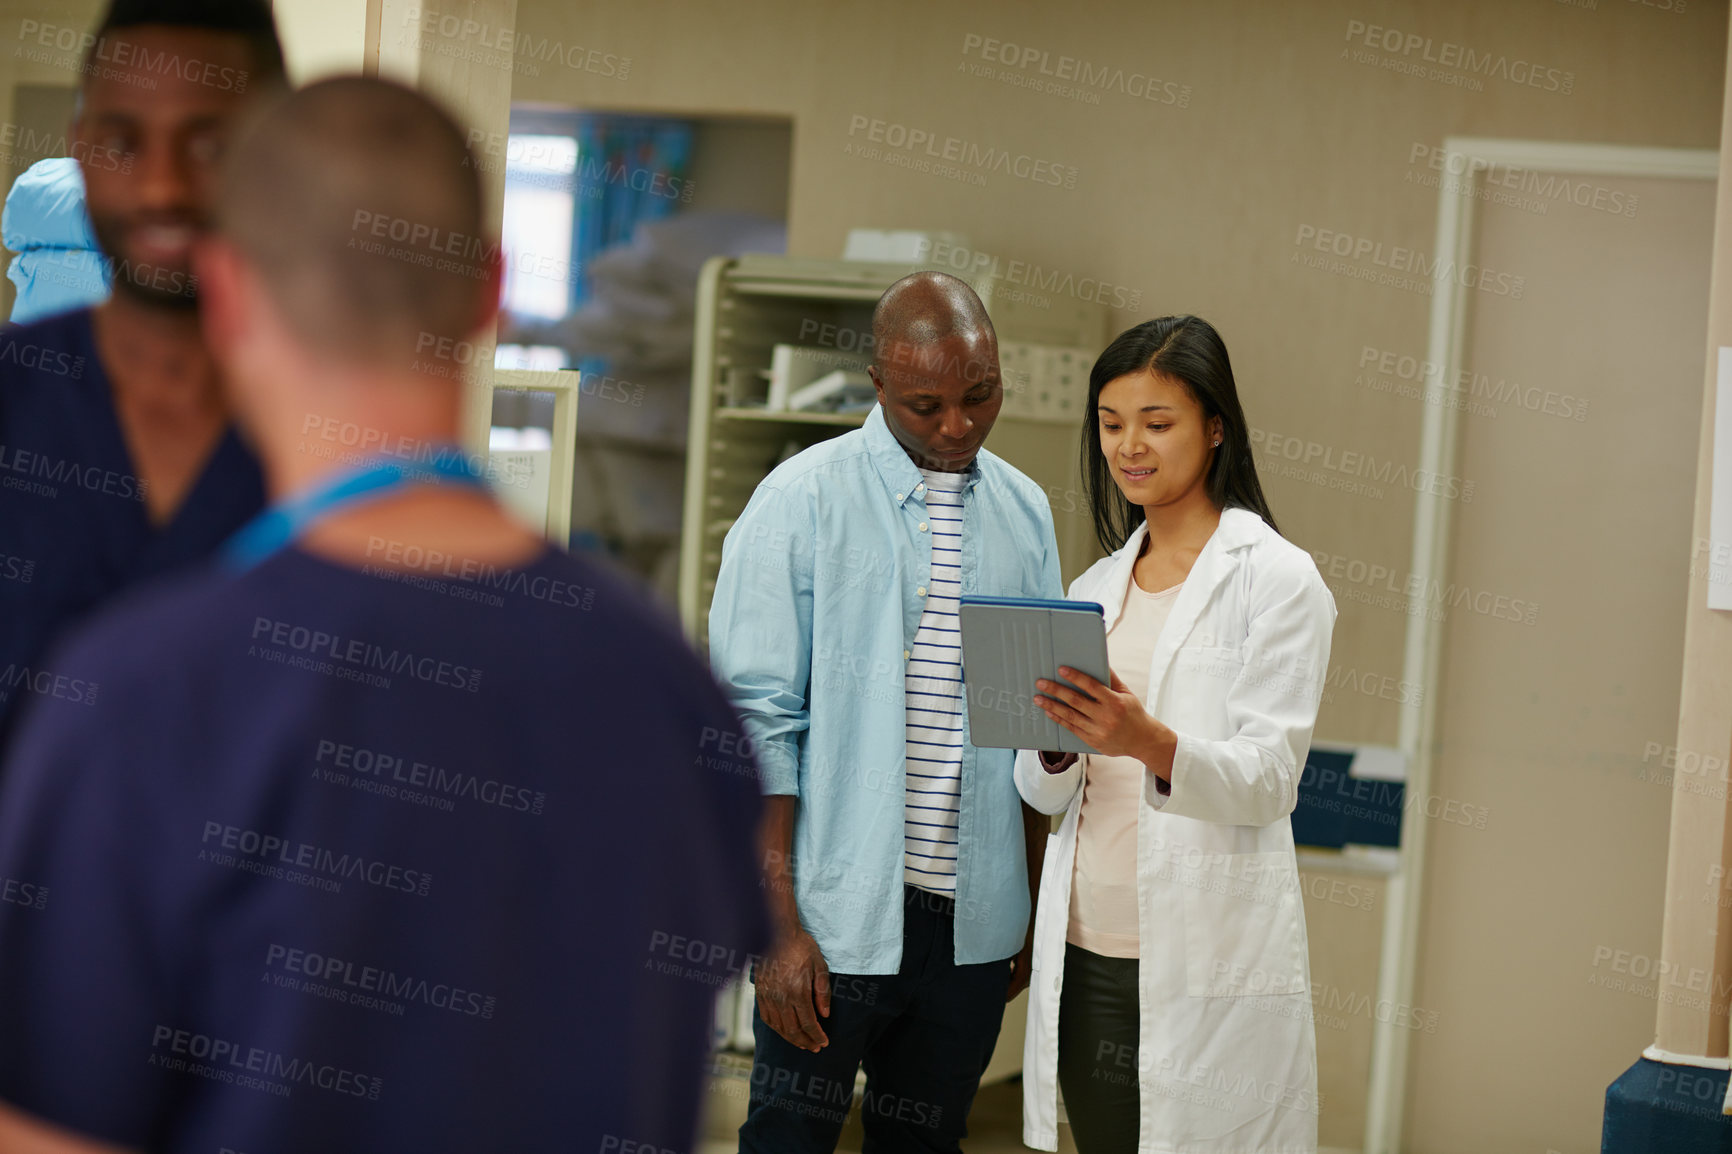 Buy stock photo Shot of a doctor working in a hospital